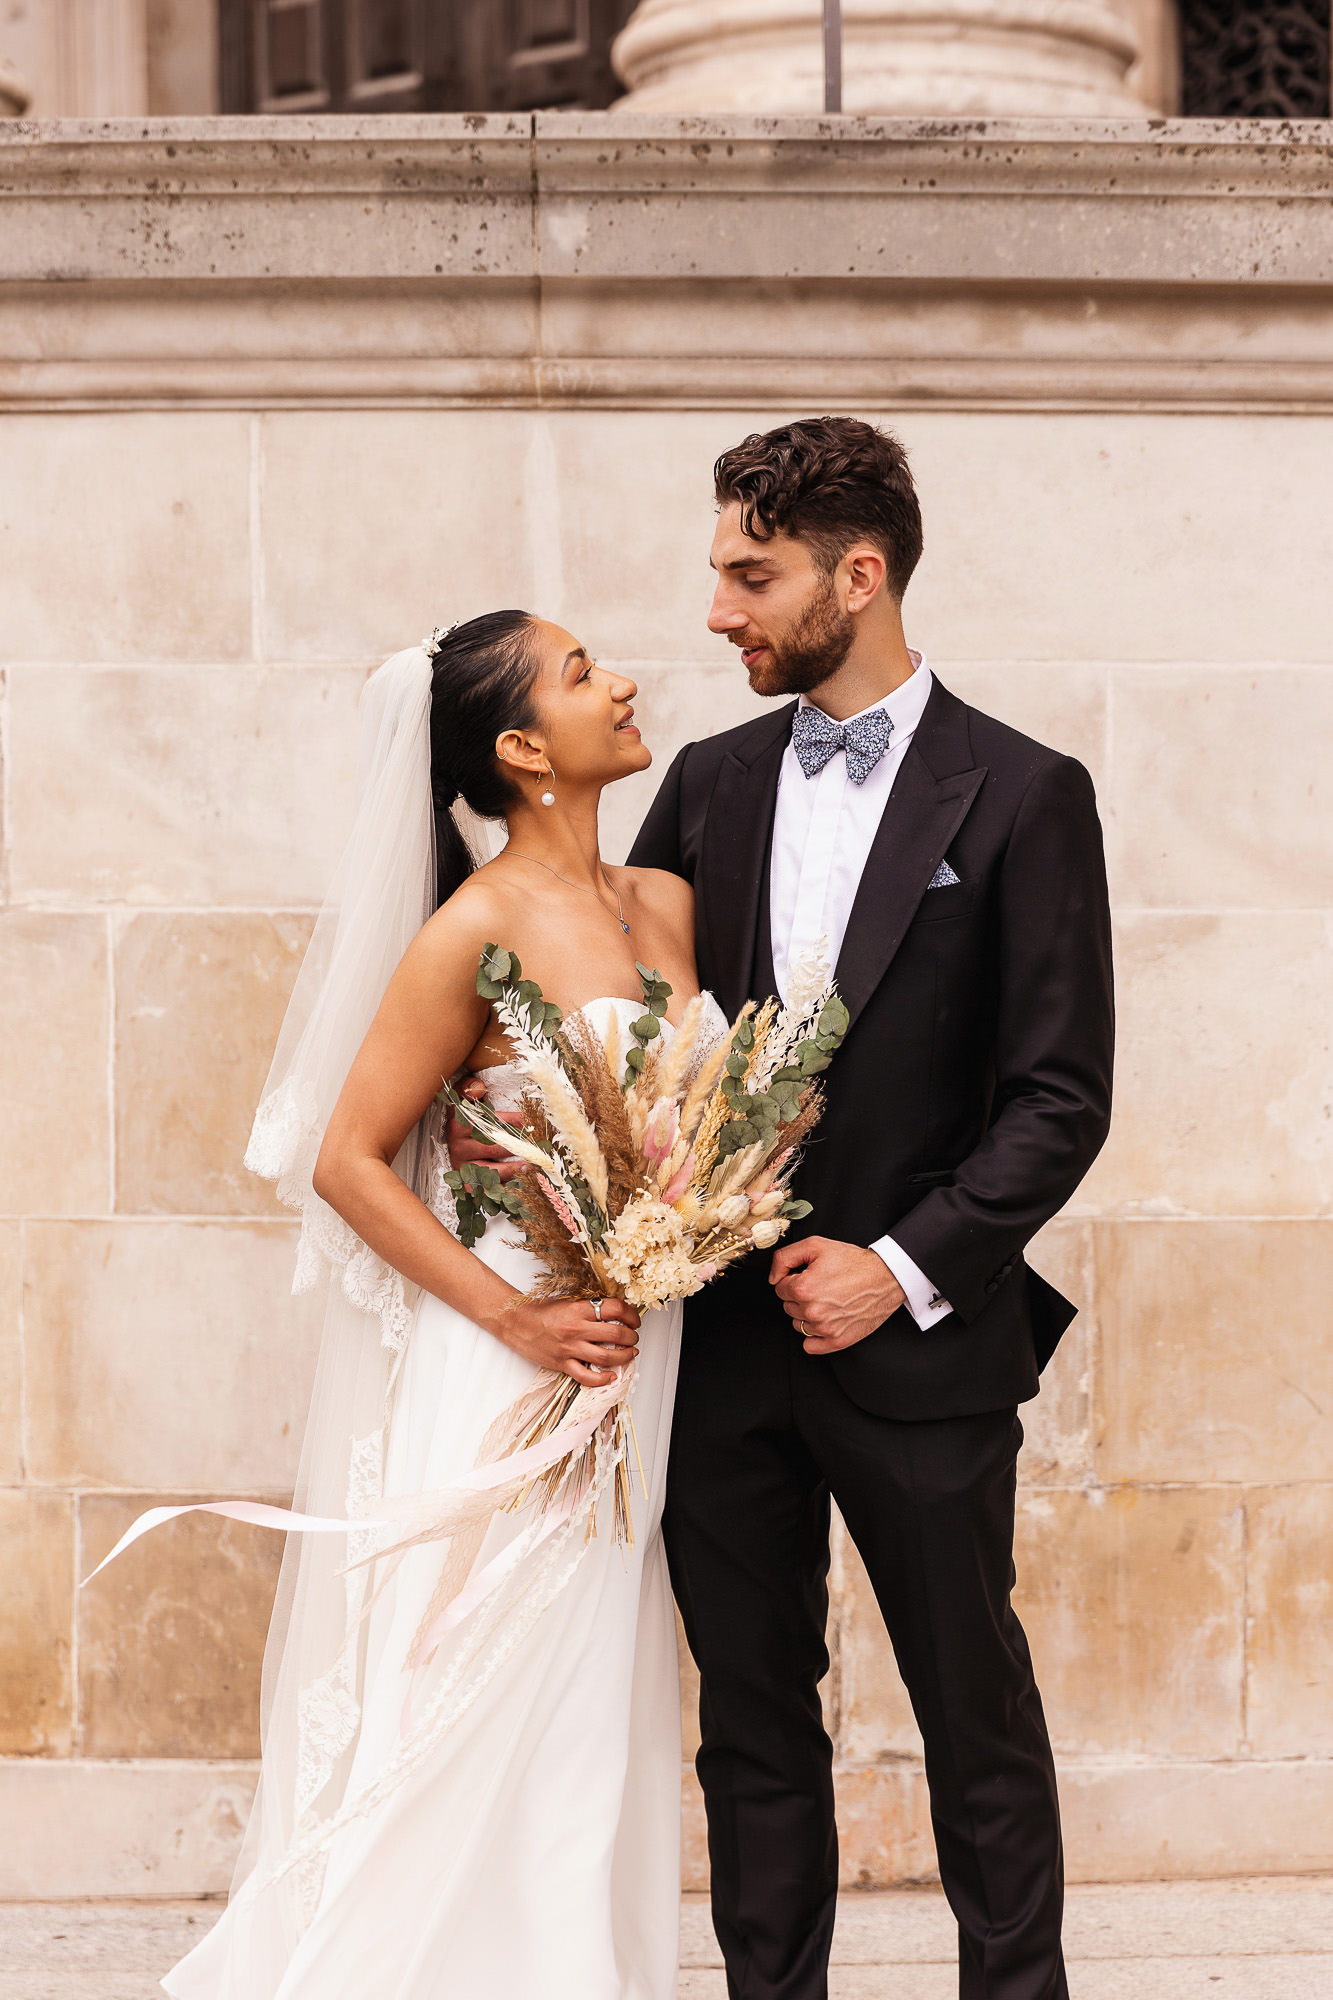 Multicultural wedding photographer, St Pauls Cathedral, London, Couples portraits